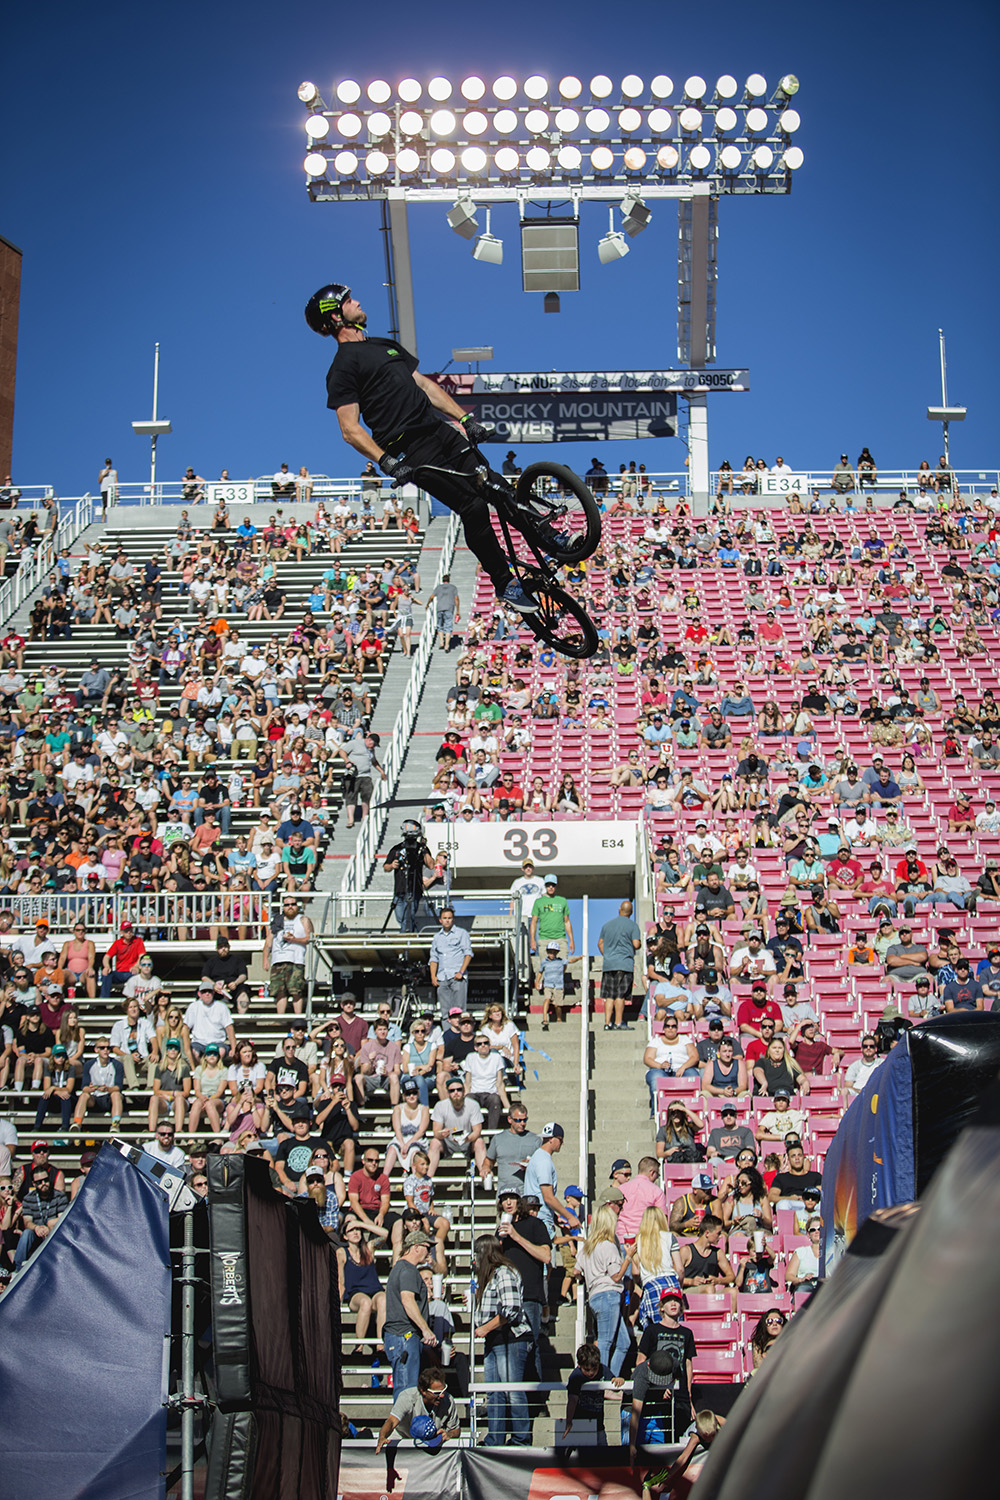 Monster Energy's Brian Fox Takes Third Place in BMX Triple Hit at the Nitro World Games in Salt Lake City